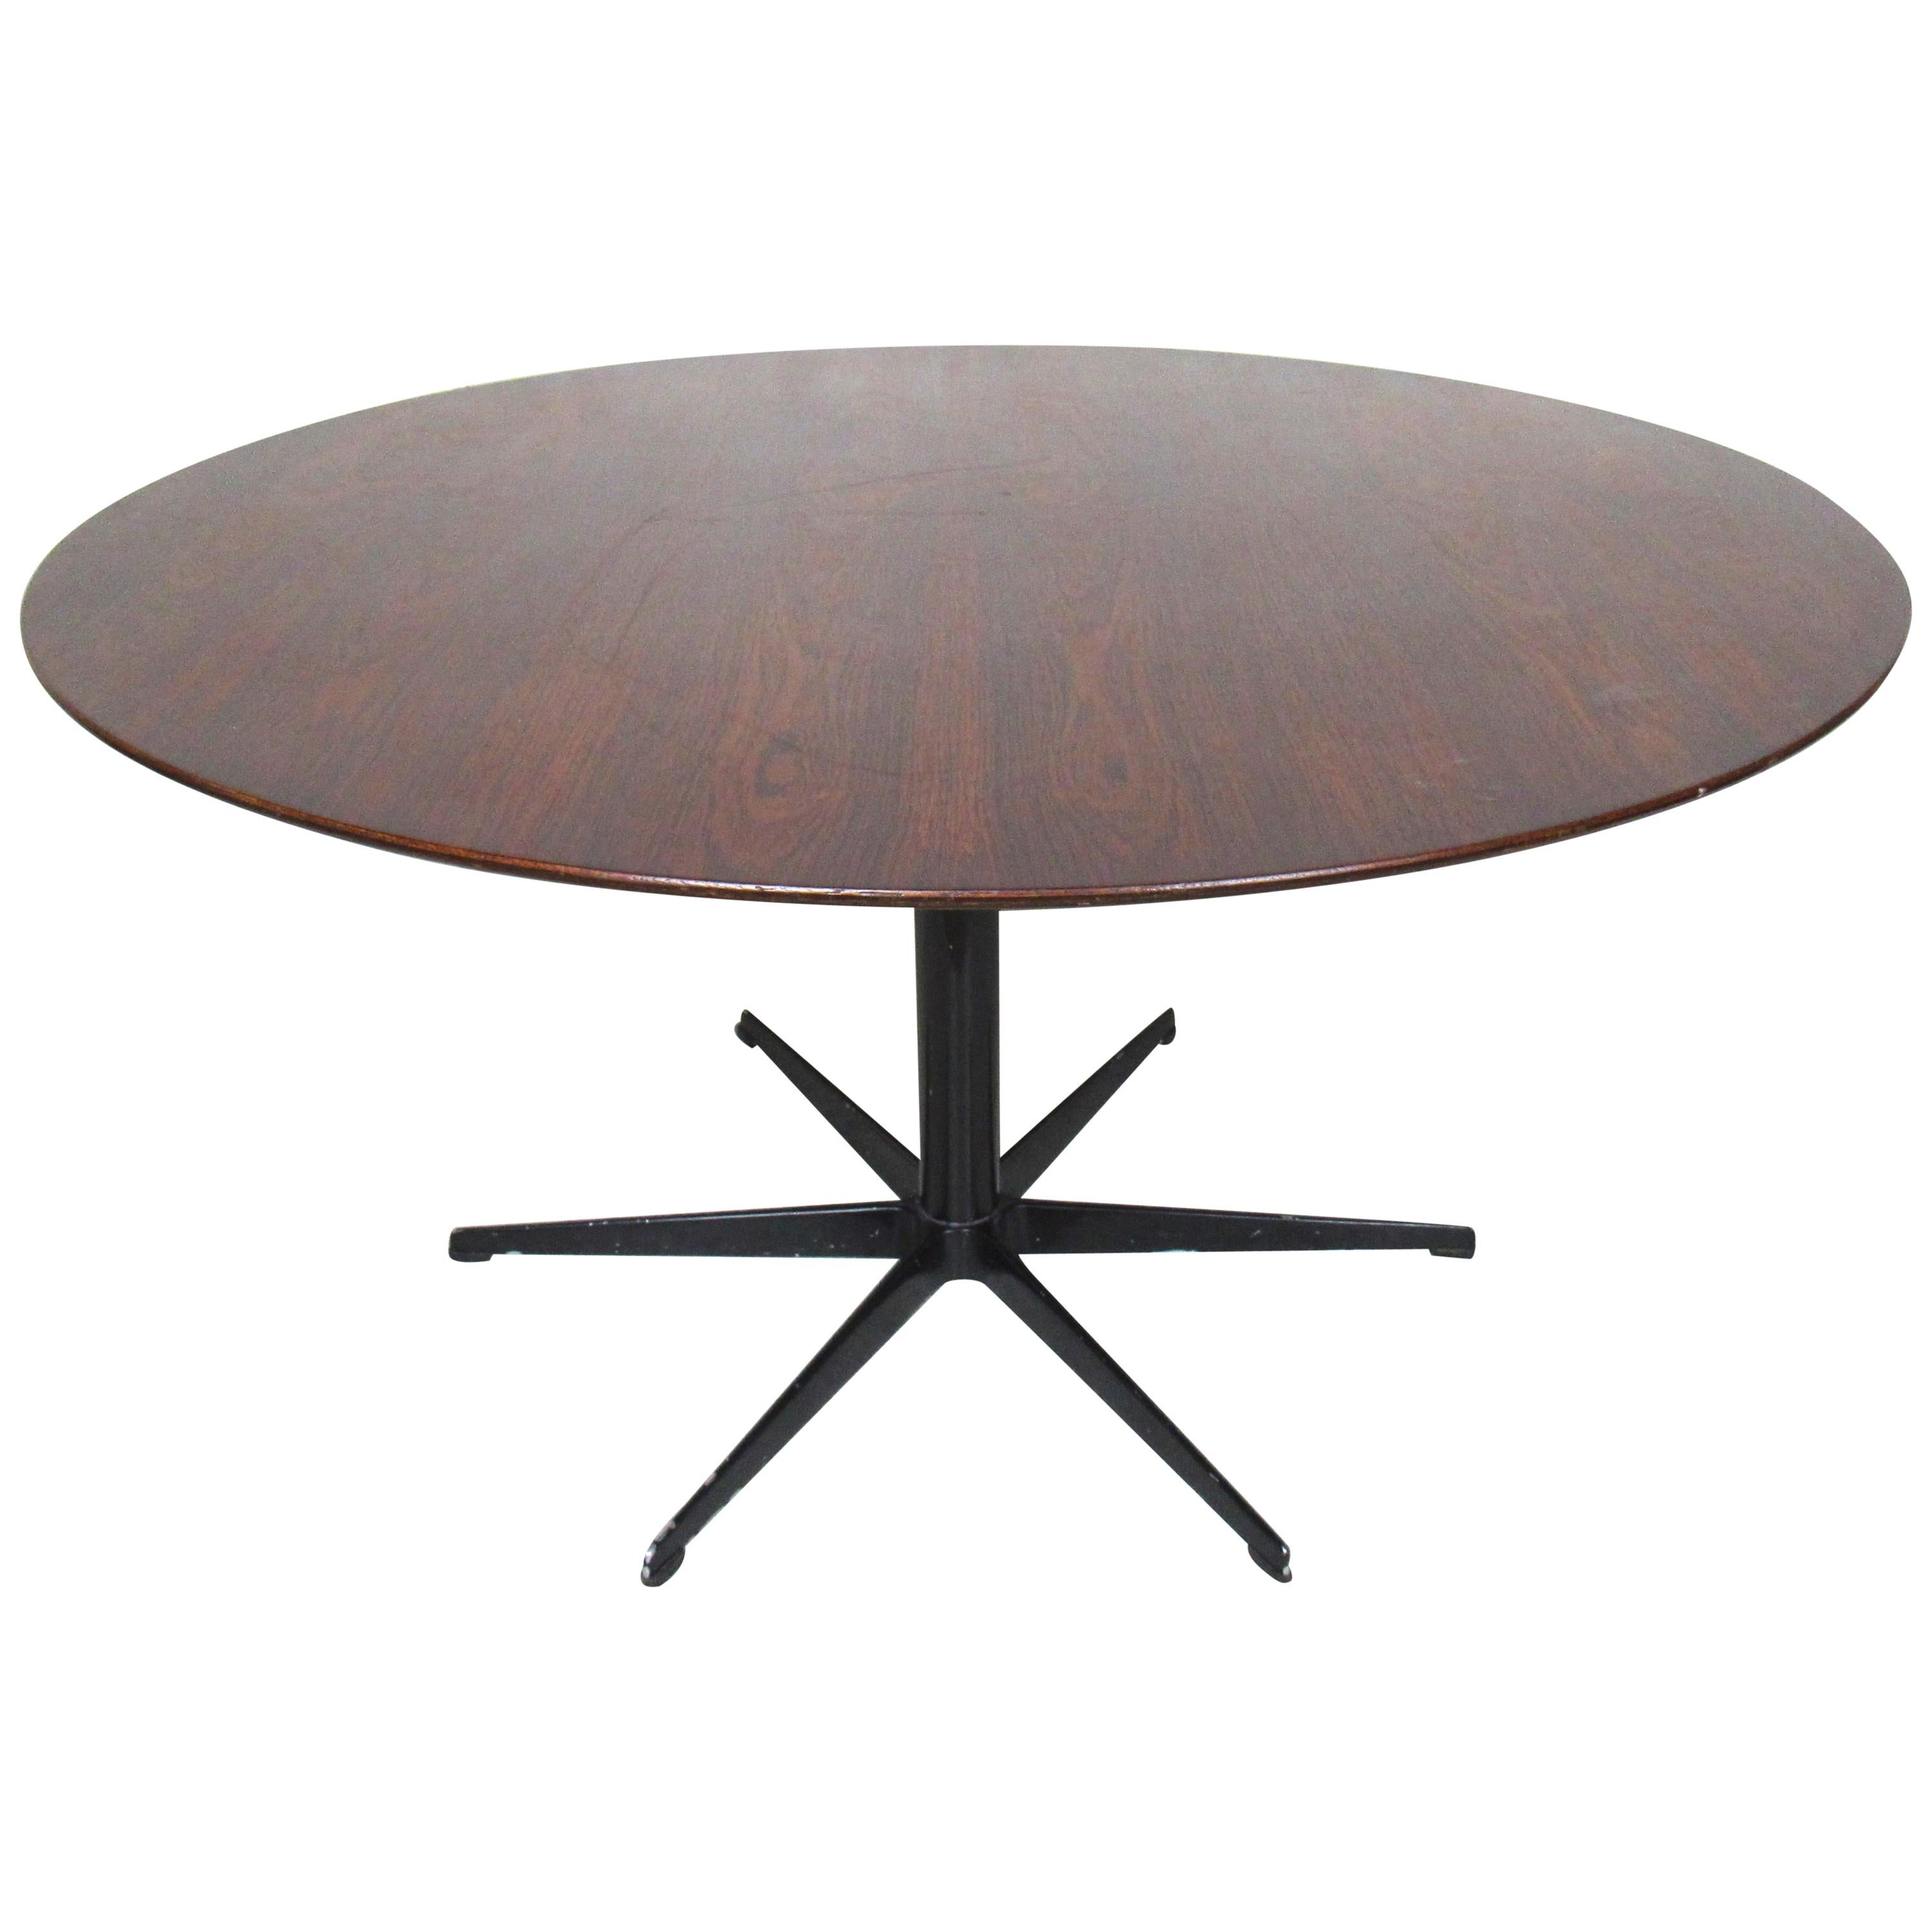 Six Star Series Rosewood Table by Arne Jacobsen for Fritz Hansen For Sale